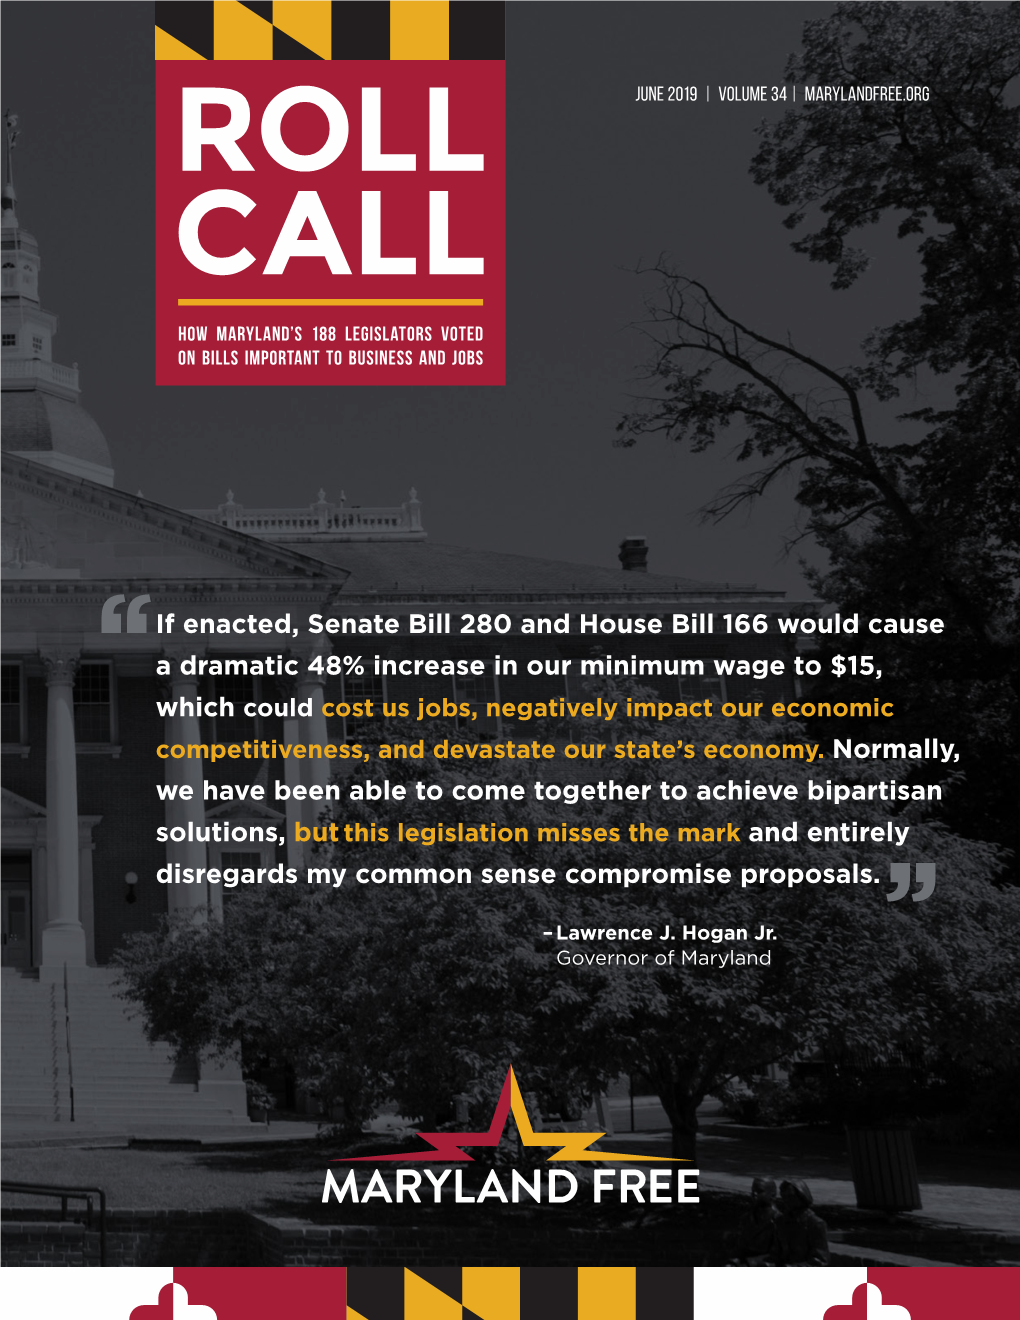 If Enacted, Senate Bill 280 and House Bill 166 Would Cause a Dramatic 48